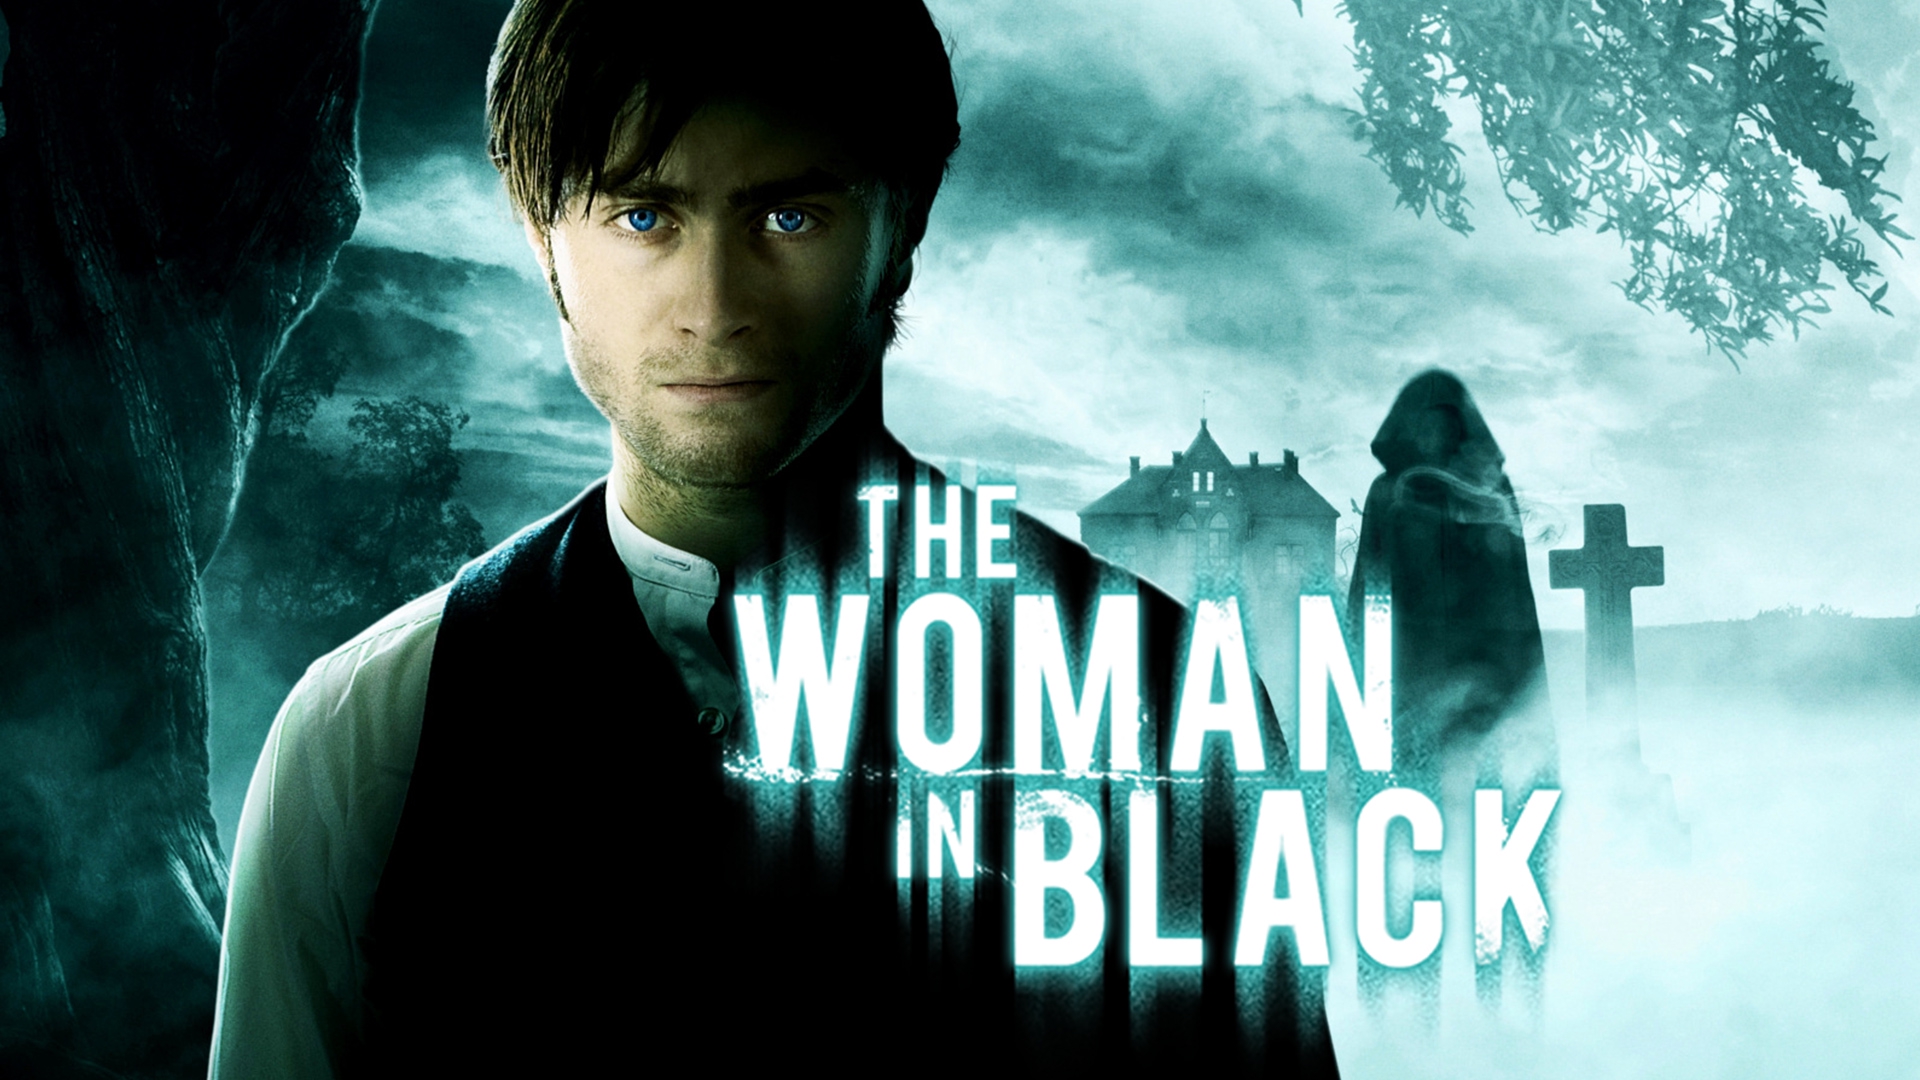 Stream the woman in black online download and watch hd movies